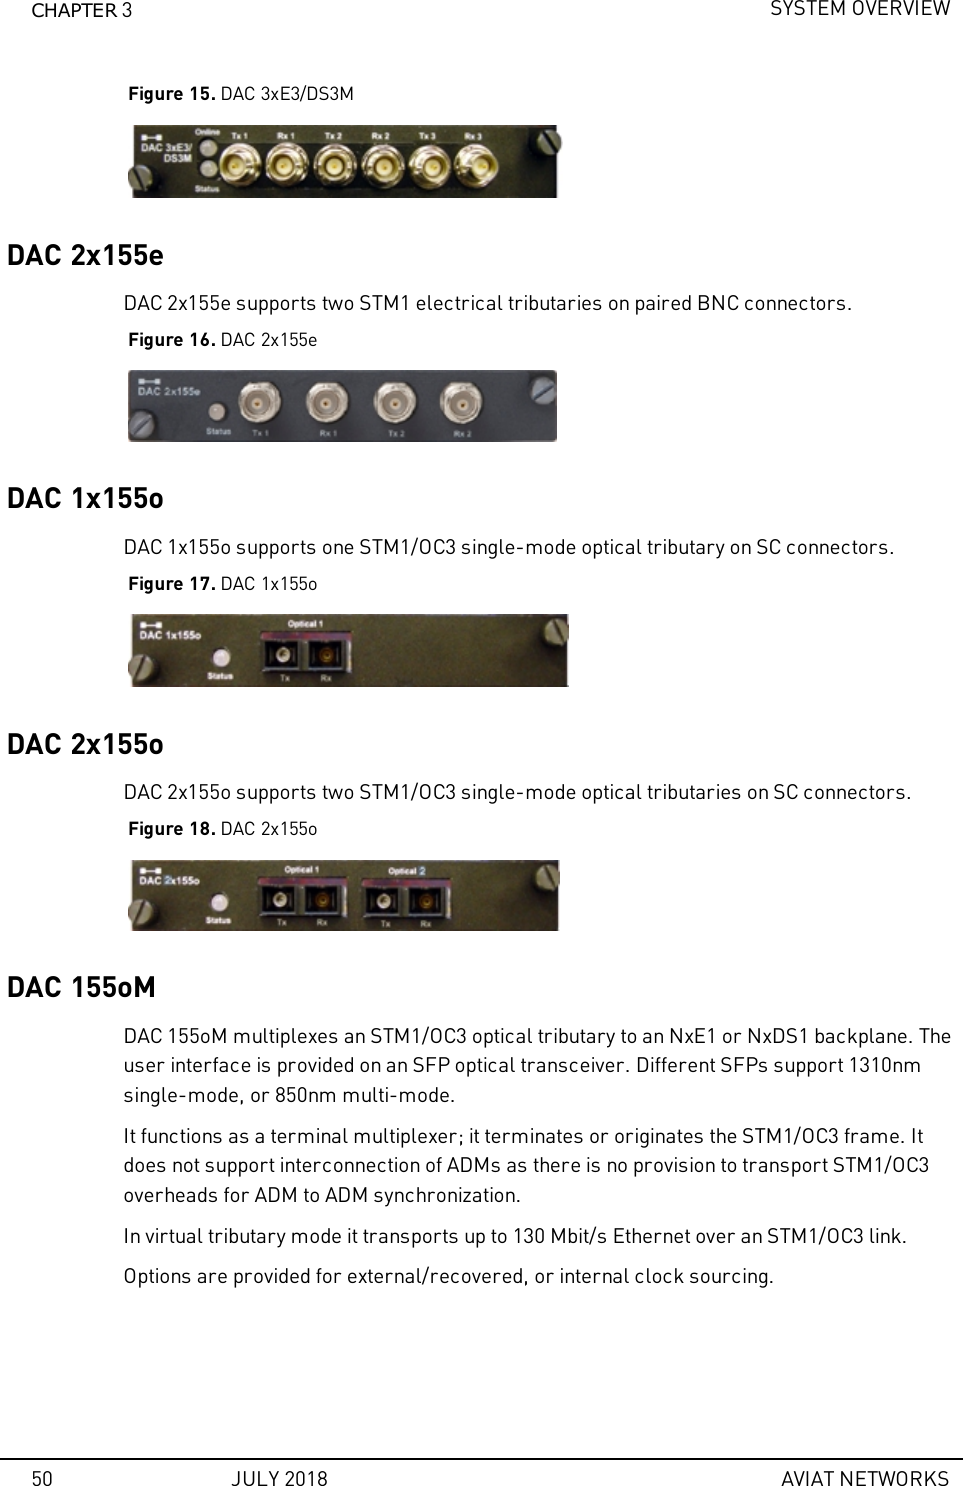 CHAPTER 3SYSTEM OVERVIEWFigure 15. DAC 3xE3/DS3MDAC 2x155eDAC 2x155e supports two STM1 electrical tributaries on paired BNC connectors.Figure 16. DAC 2x155eDAC 1x155oDAC 1x155o supports one STM1/OC3 single-mode optical tributary on SC connectors.Figure 17. DAC 1x155oDAC 2x155oDAC 2x155o supports two STM1/OC3 single-mode optical tributaries on SC connectors.Figure 18. DAC 2x155oDAC 155oMDAC 155oM multiplexes an STM1/OC3 optical tributary to an NxE1 or NxDS1 backplane. Theuser interface is provided on an SFP optical transceiver. Different SFPs support 1310nmsingle-mode, or 850nm multi-mode.It functions as a terminal multiplexer; it terminates or originates the STM1/OC3 frame. Itdoes not support interconnection of ADMs as there is no provision to transport STM1/OC3overheads for ADM to ADM synchronization.In virtual tributary mode it transports up to 130 Mbit/s Ethernet over an STM1/OC3 link.Options are provided for external/recovered, or internal clock sourcing.50 JULY 2018 AVIAT NETWORKS